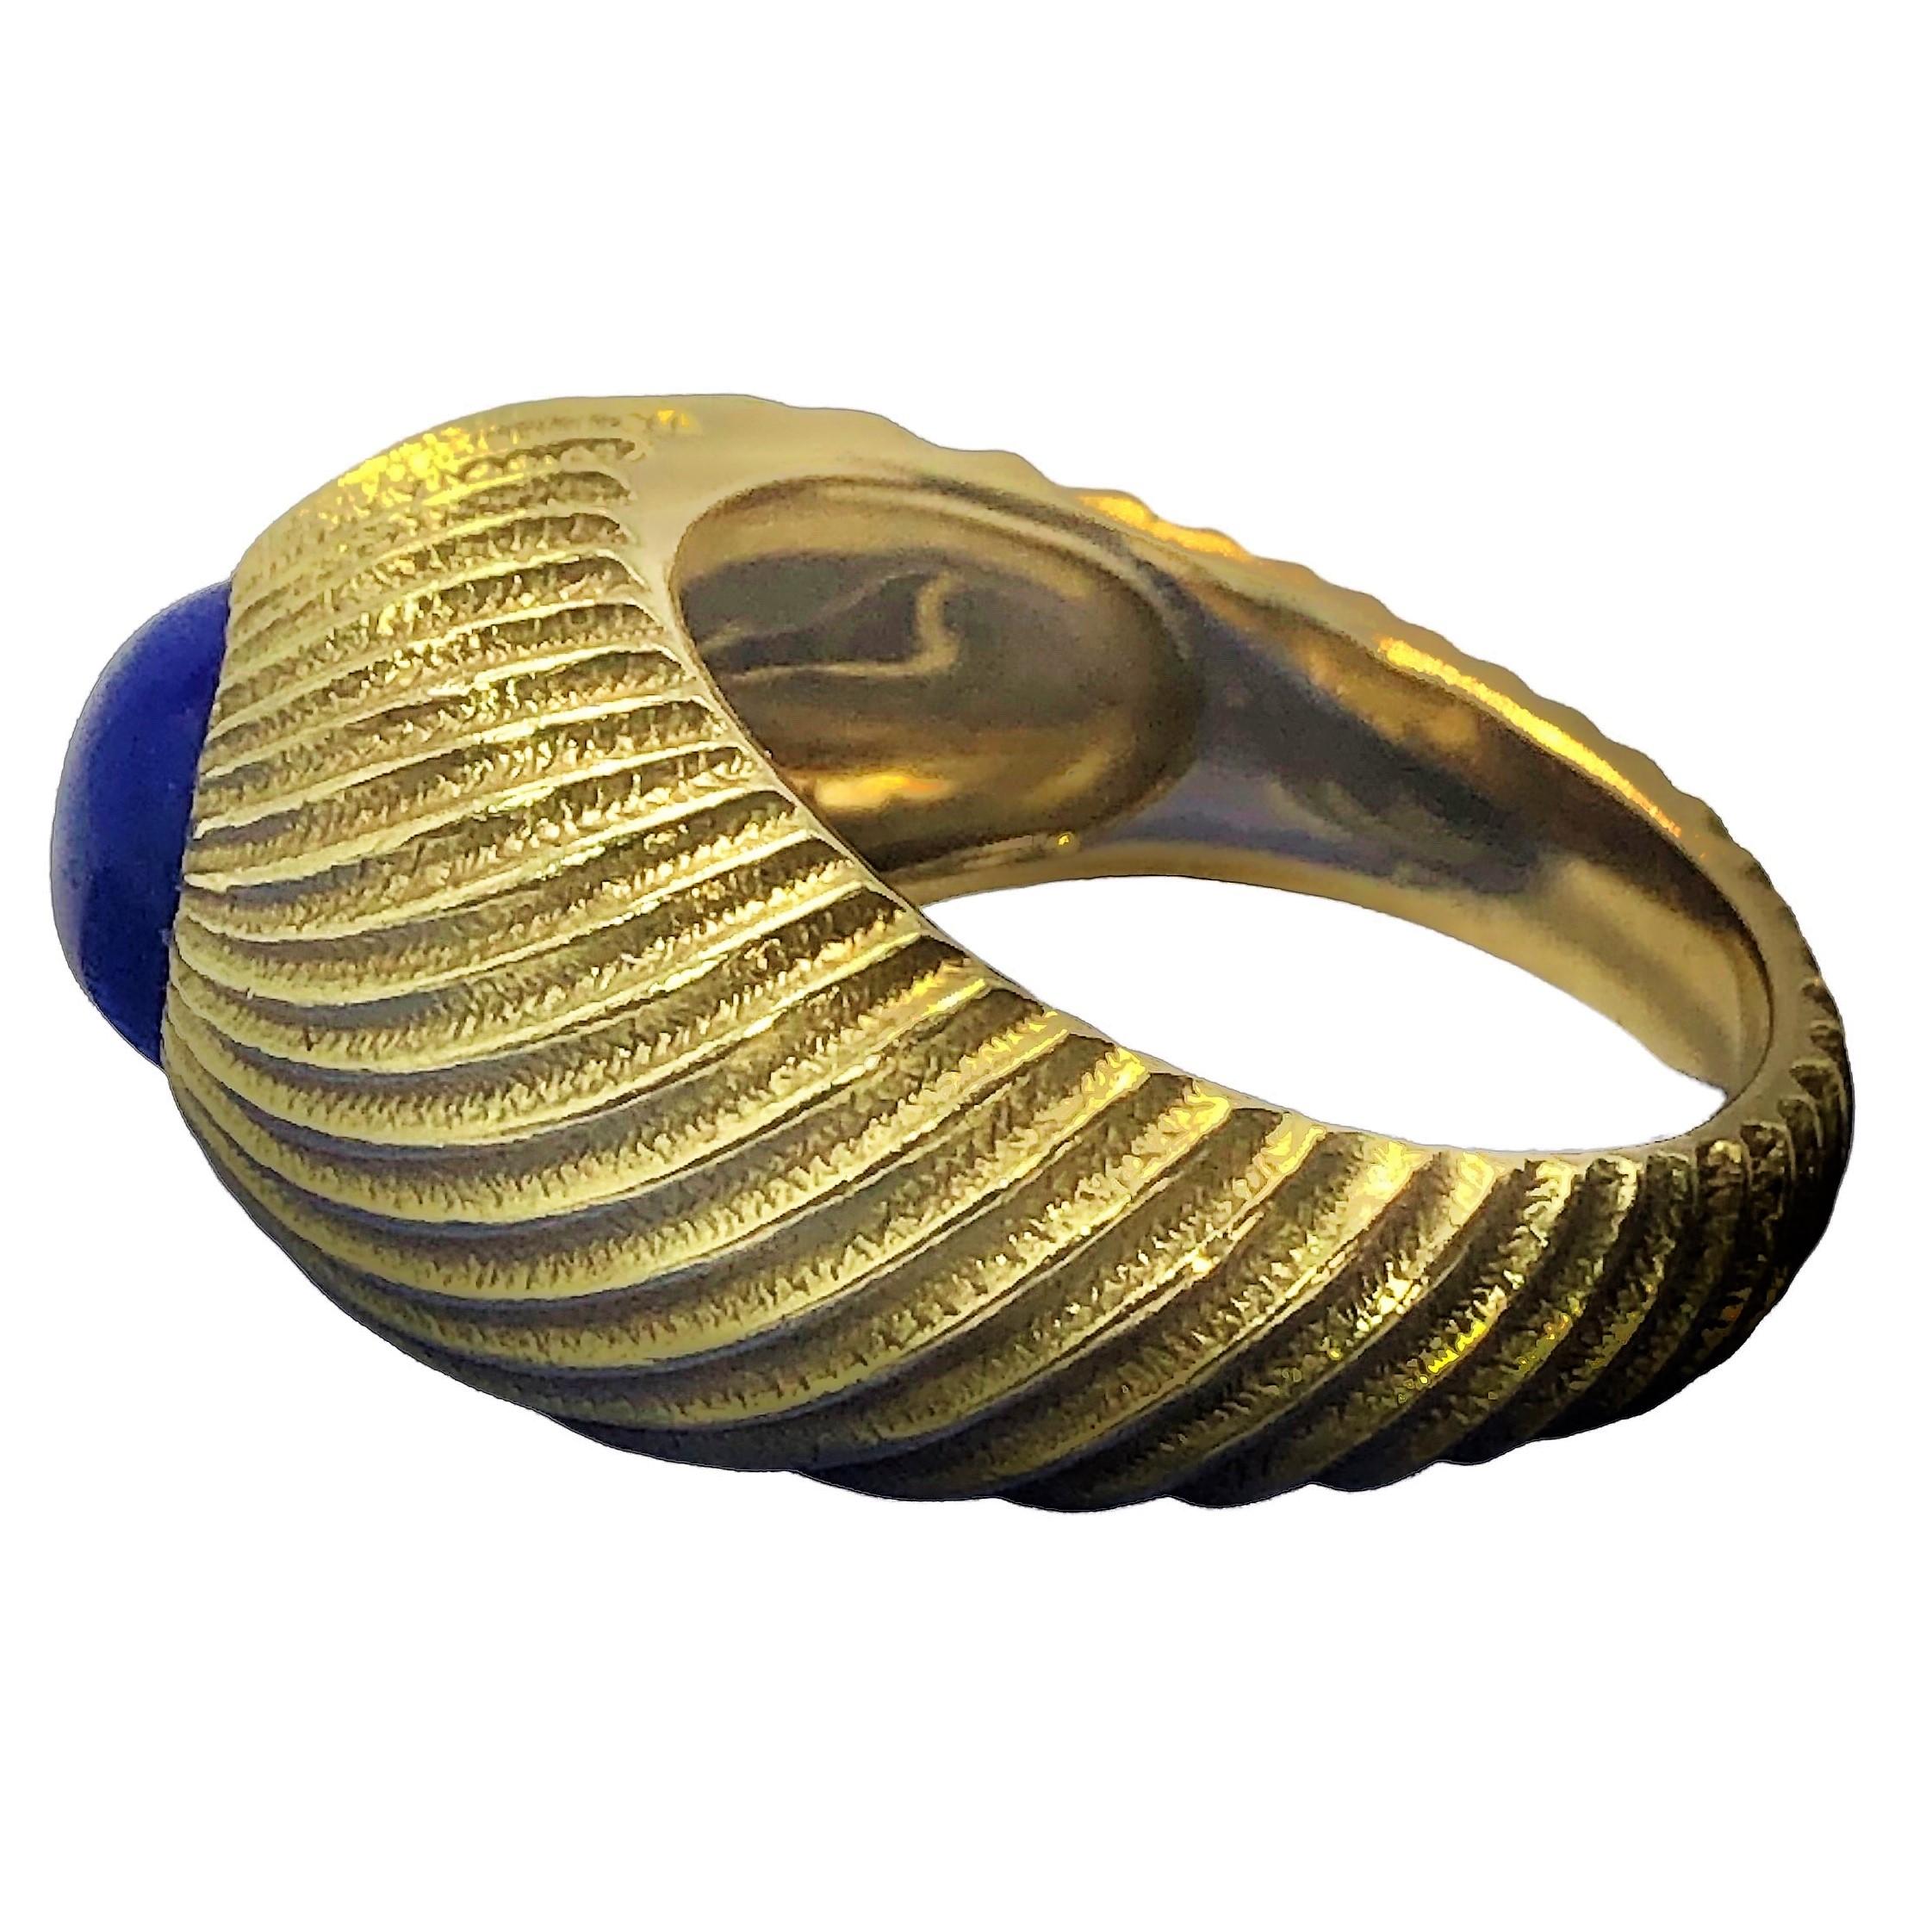 This elegant men's 18k yellow gold Tiffany & Co. Schlumberger dome ring is a graceful swirl of richly textured gold, terminating at the top in an 8mm round, rich blue Lapis-lazuli cabochon. Inside the ring a plate bears the name Tiffany & Co.